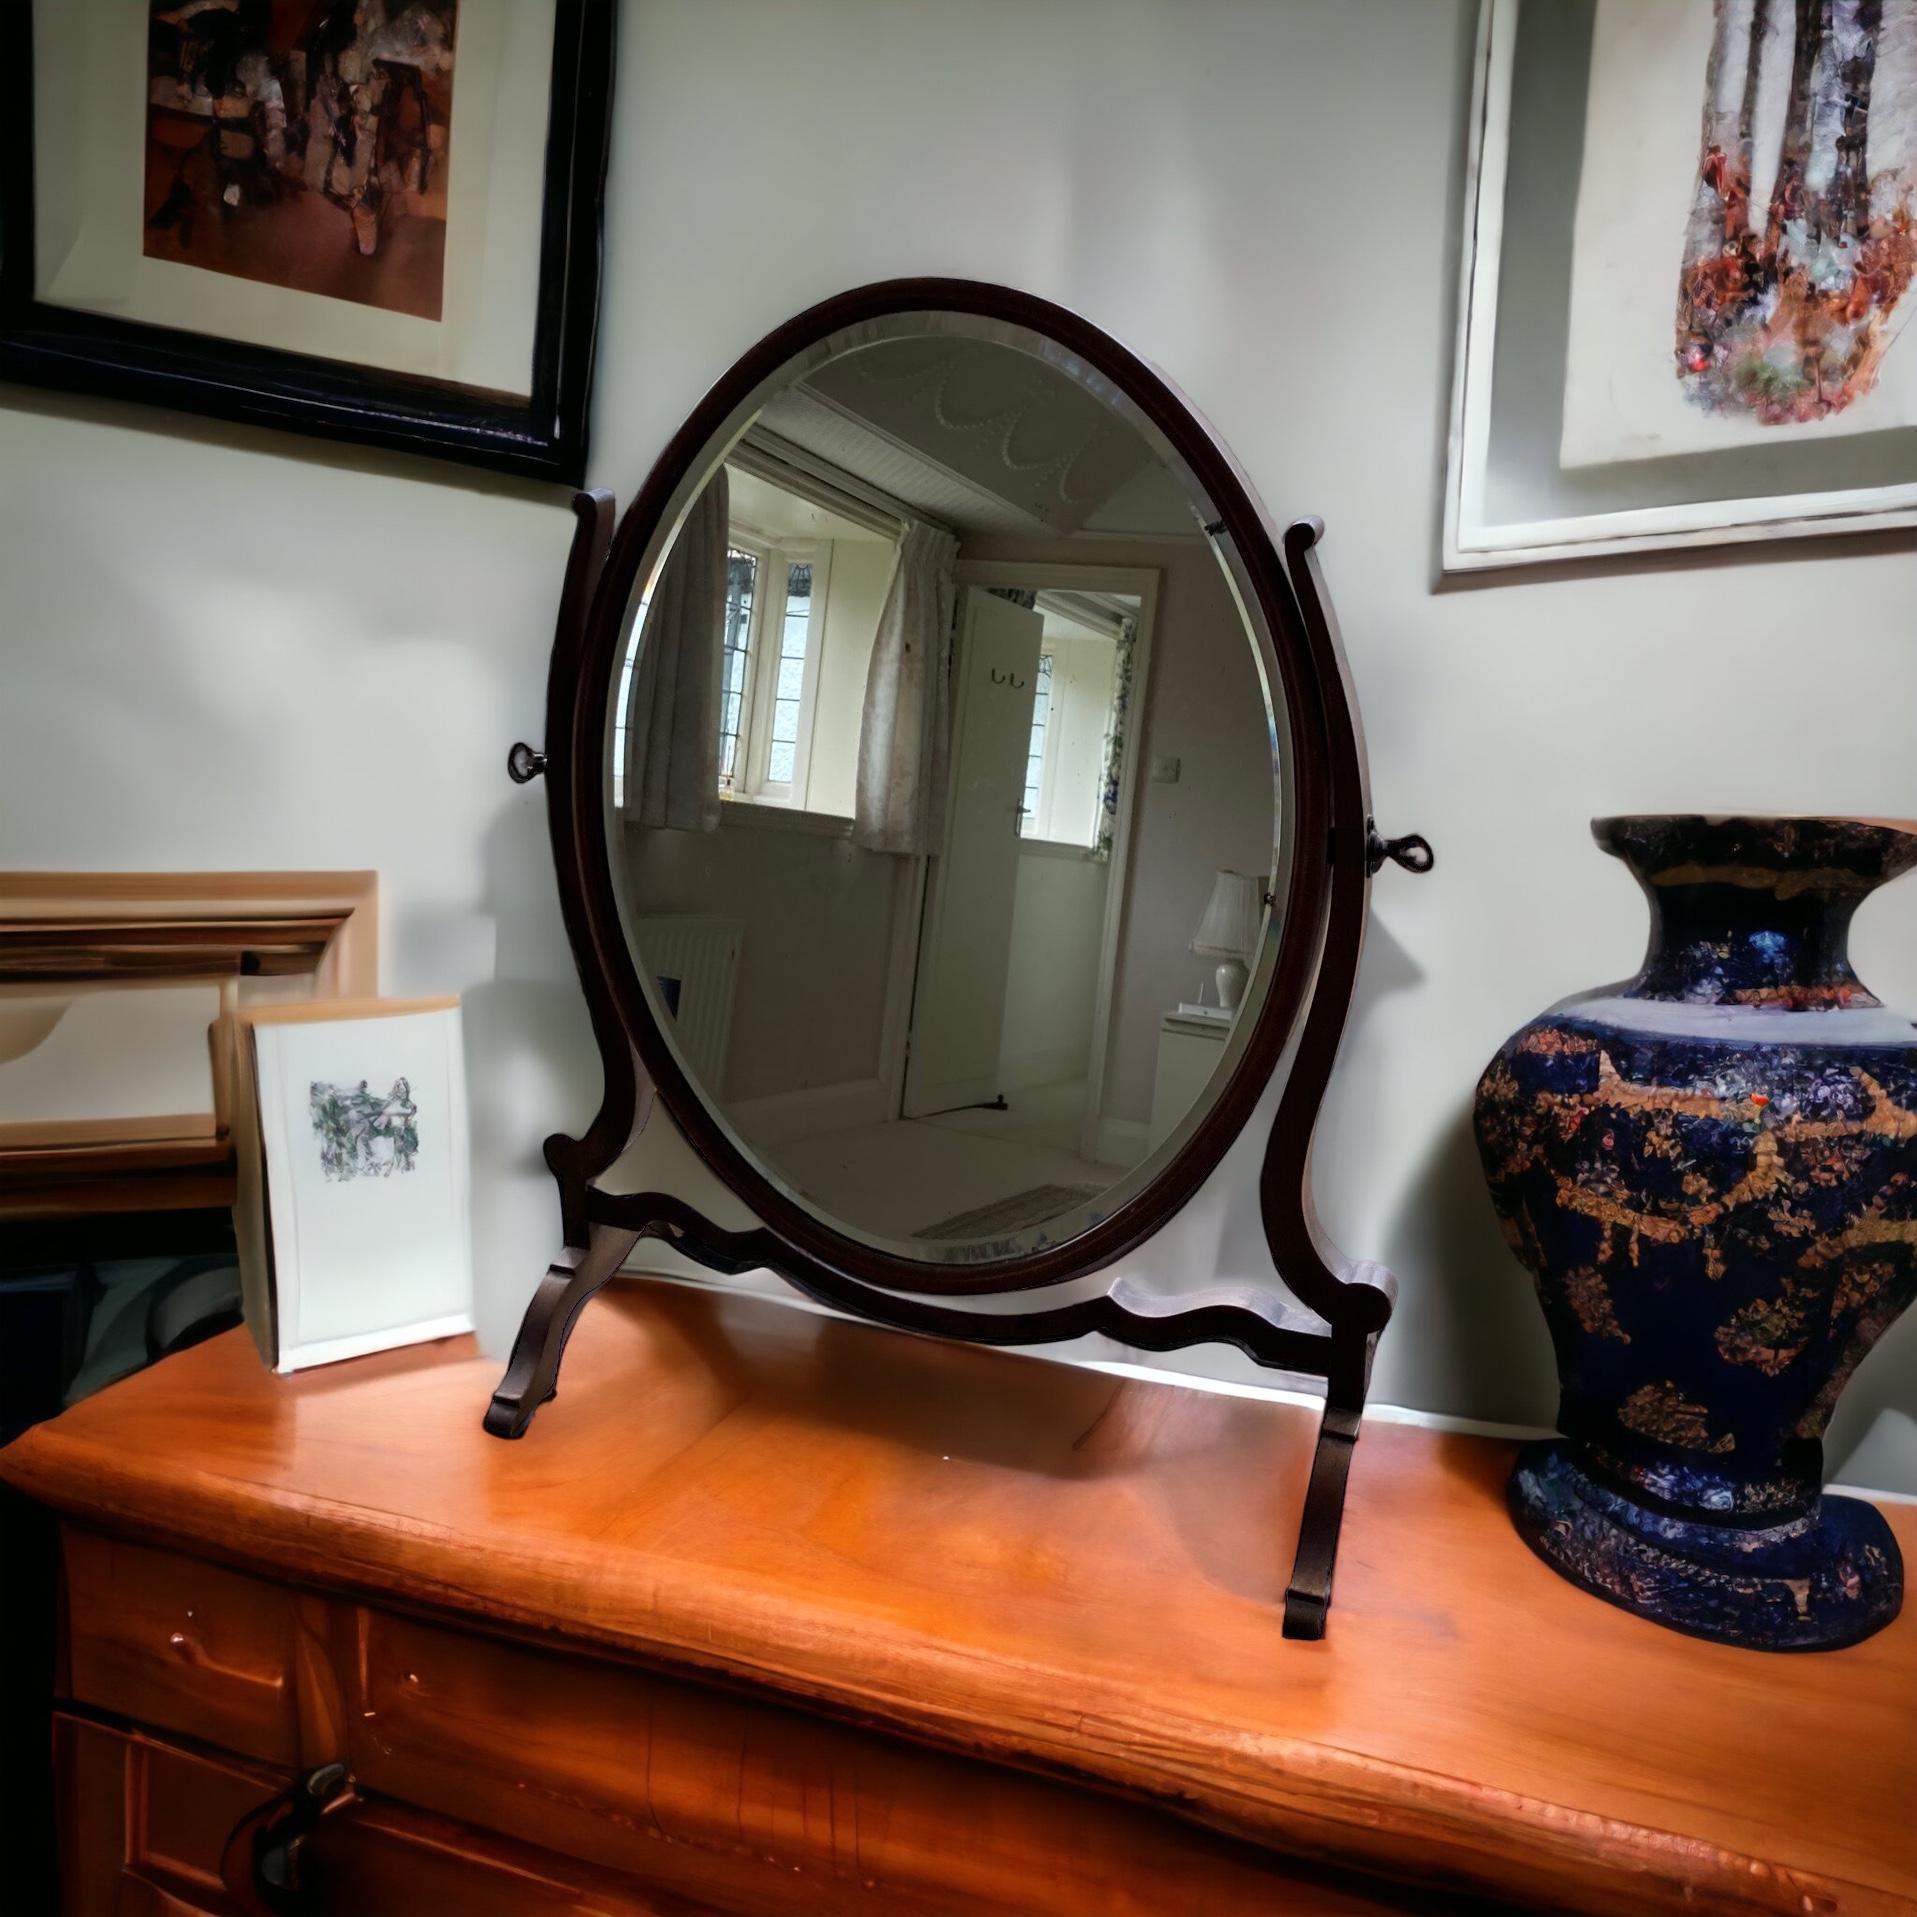 Antique Oval Dressing Mirror late 19th Century Victorian, mahogany fram and stand with slight foxing to the glass adding to its' character and look. 

H: 56 cm

W: 37 cm

D: 23 cm (base)